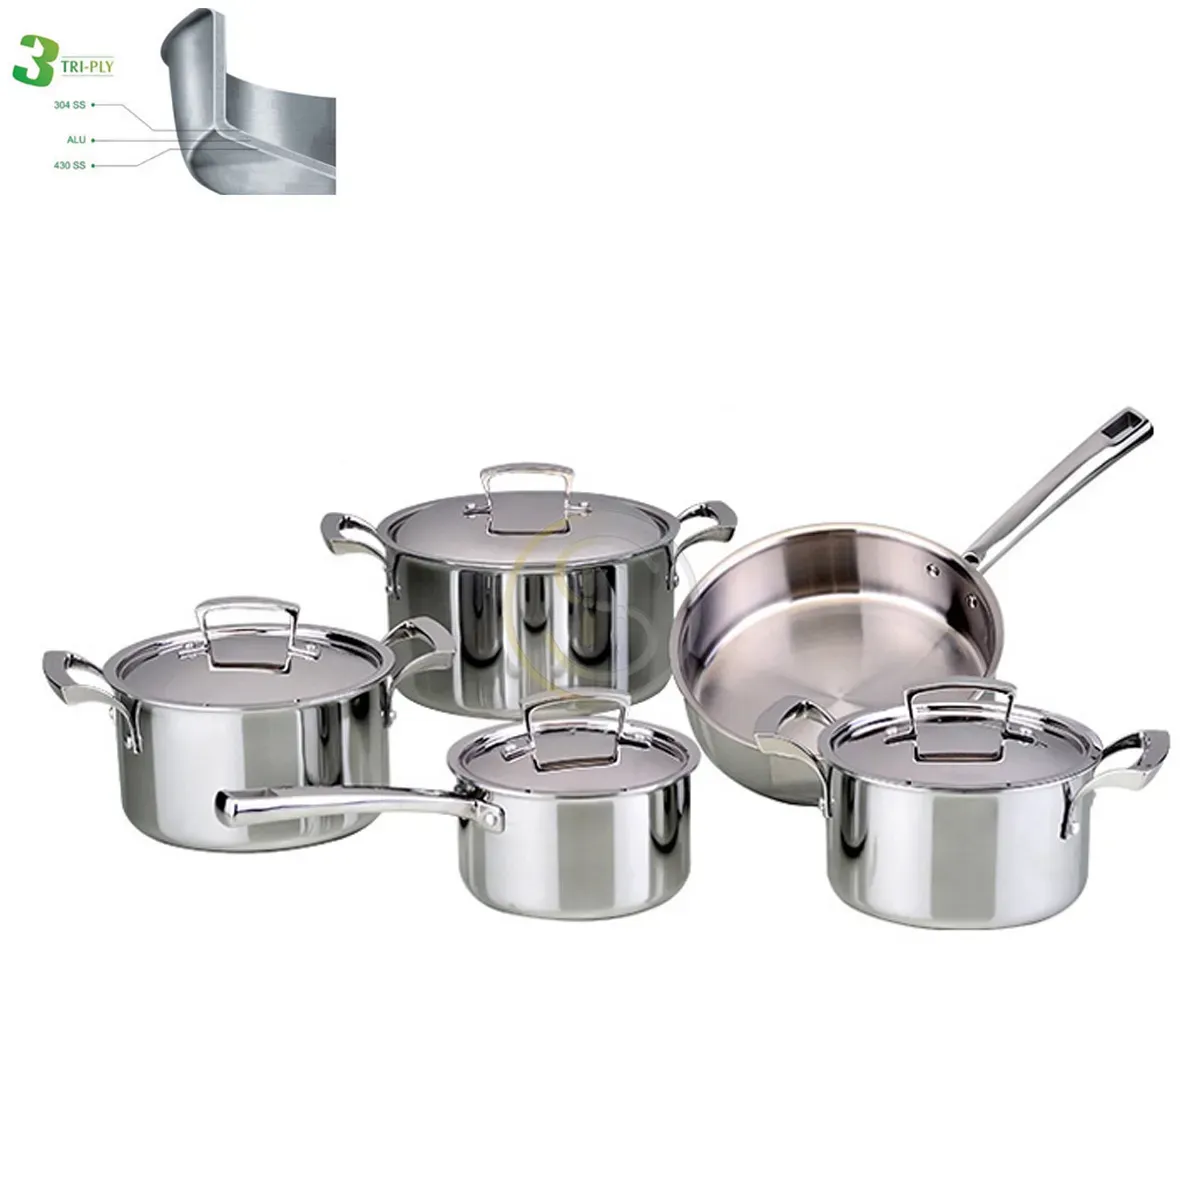 9PCS 3PLY All CLAD BODY INDUCTION COOKWARE